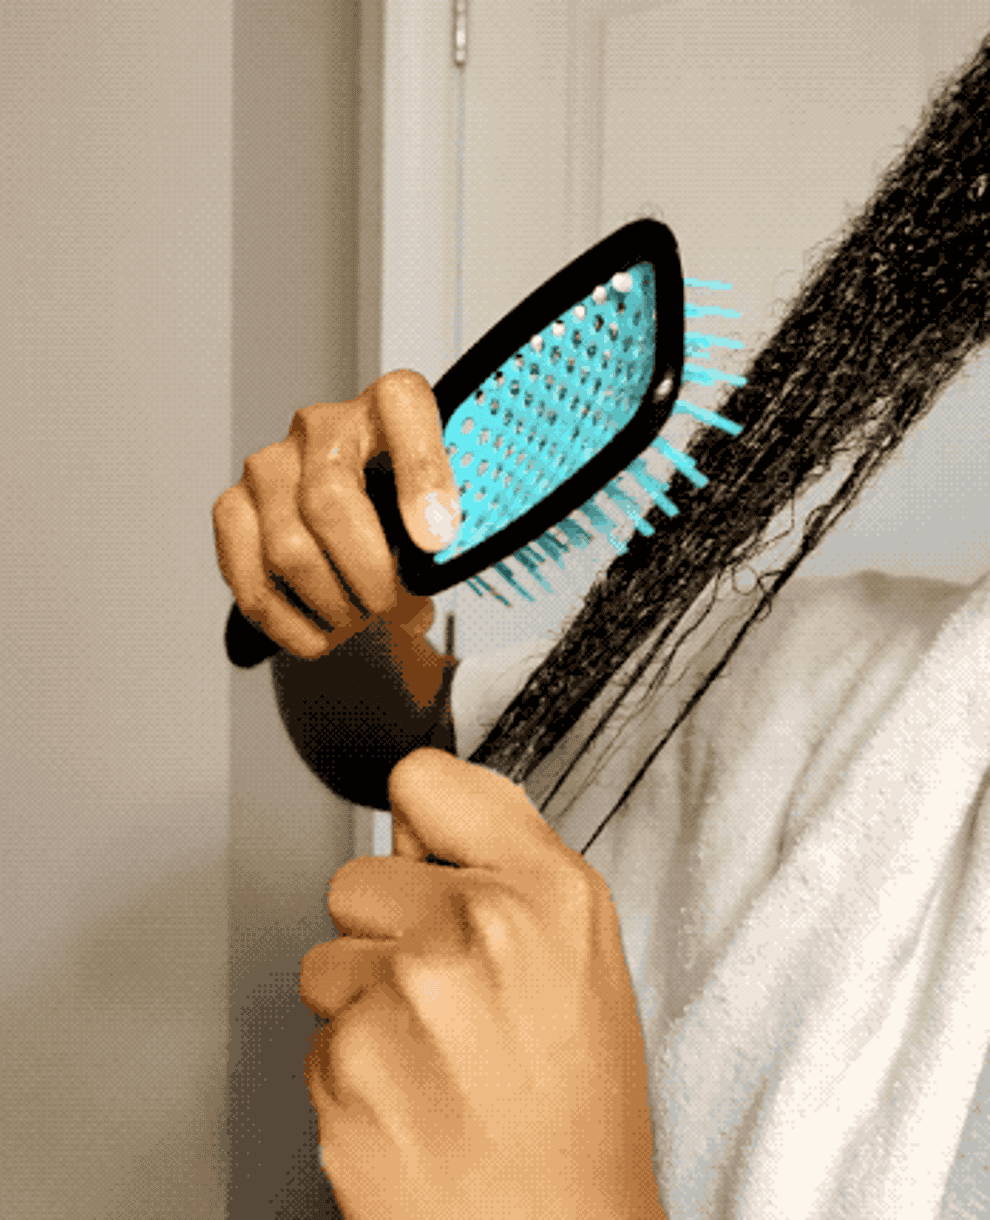 Person brushing wet hair with a blue-toothed comb, wearing a white bathrobe